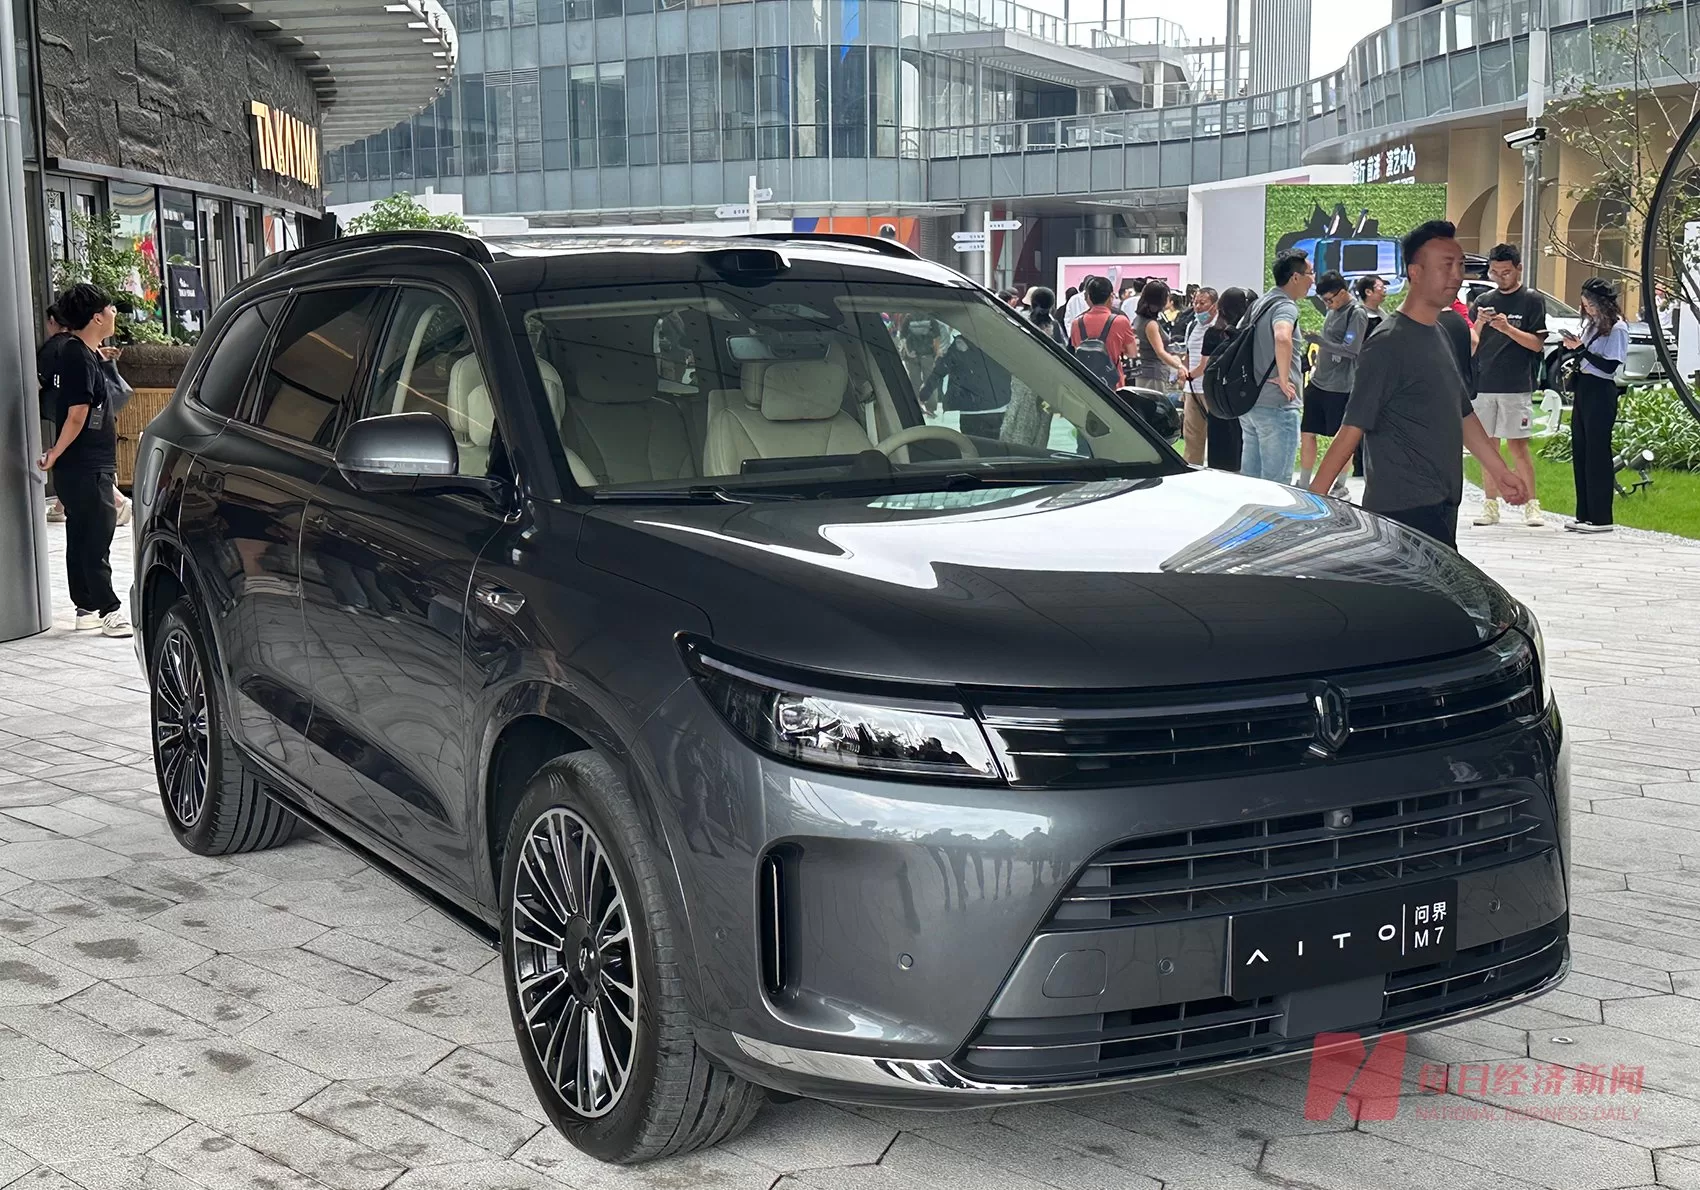 March 2024 New Energy Car Sales Surge: NIO, Leap Motor, XPeng Motors Lead Year-on-Year Growth!